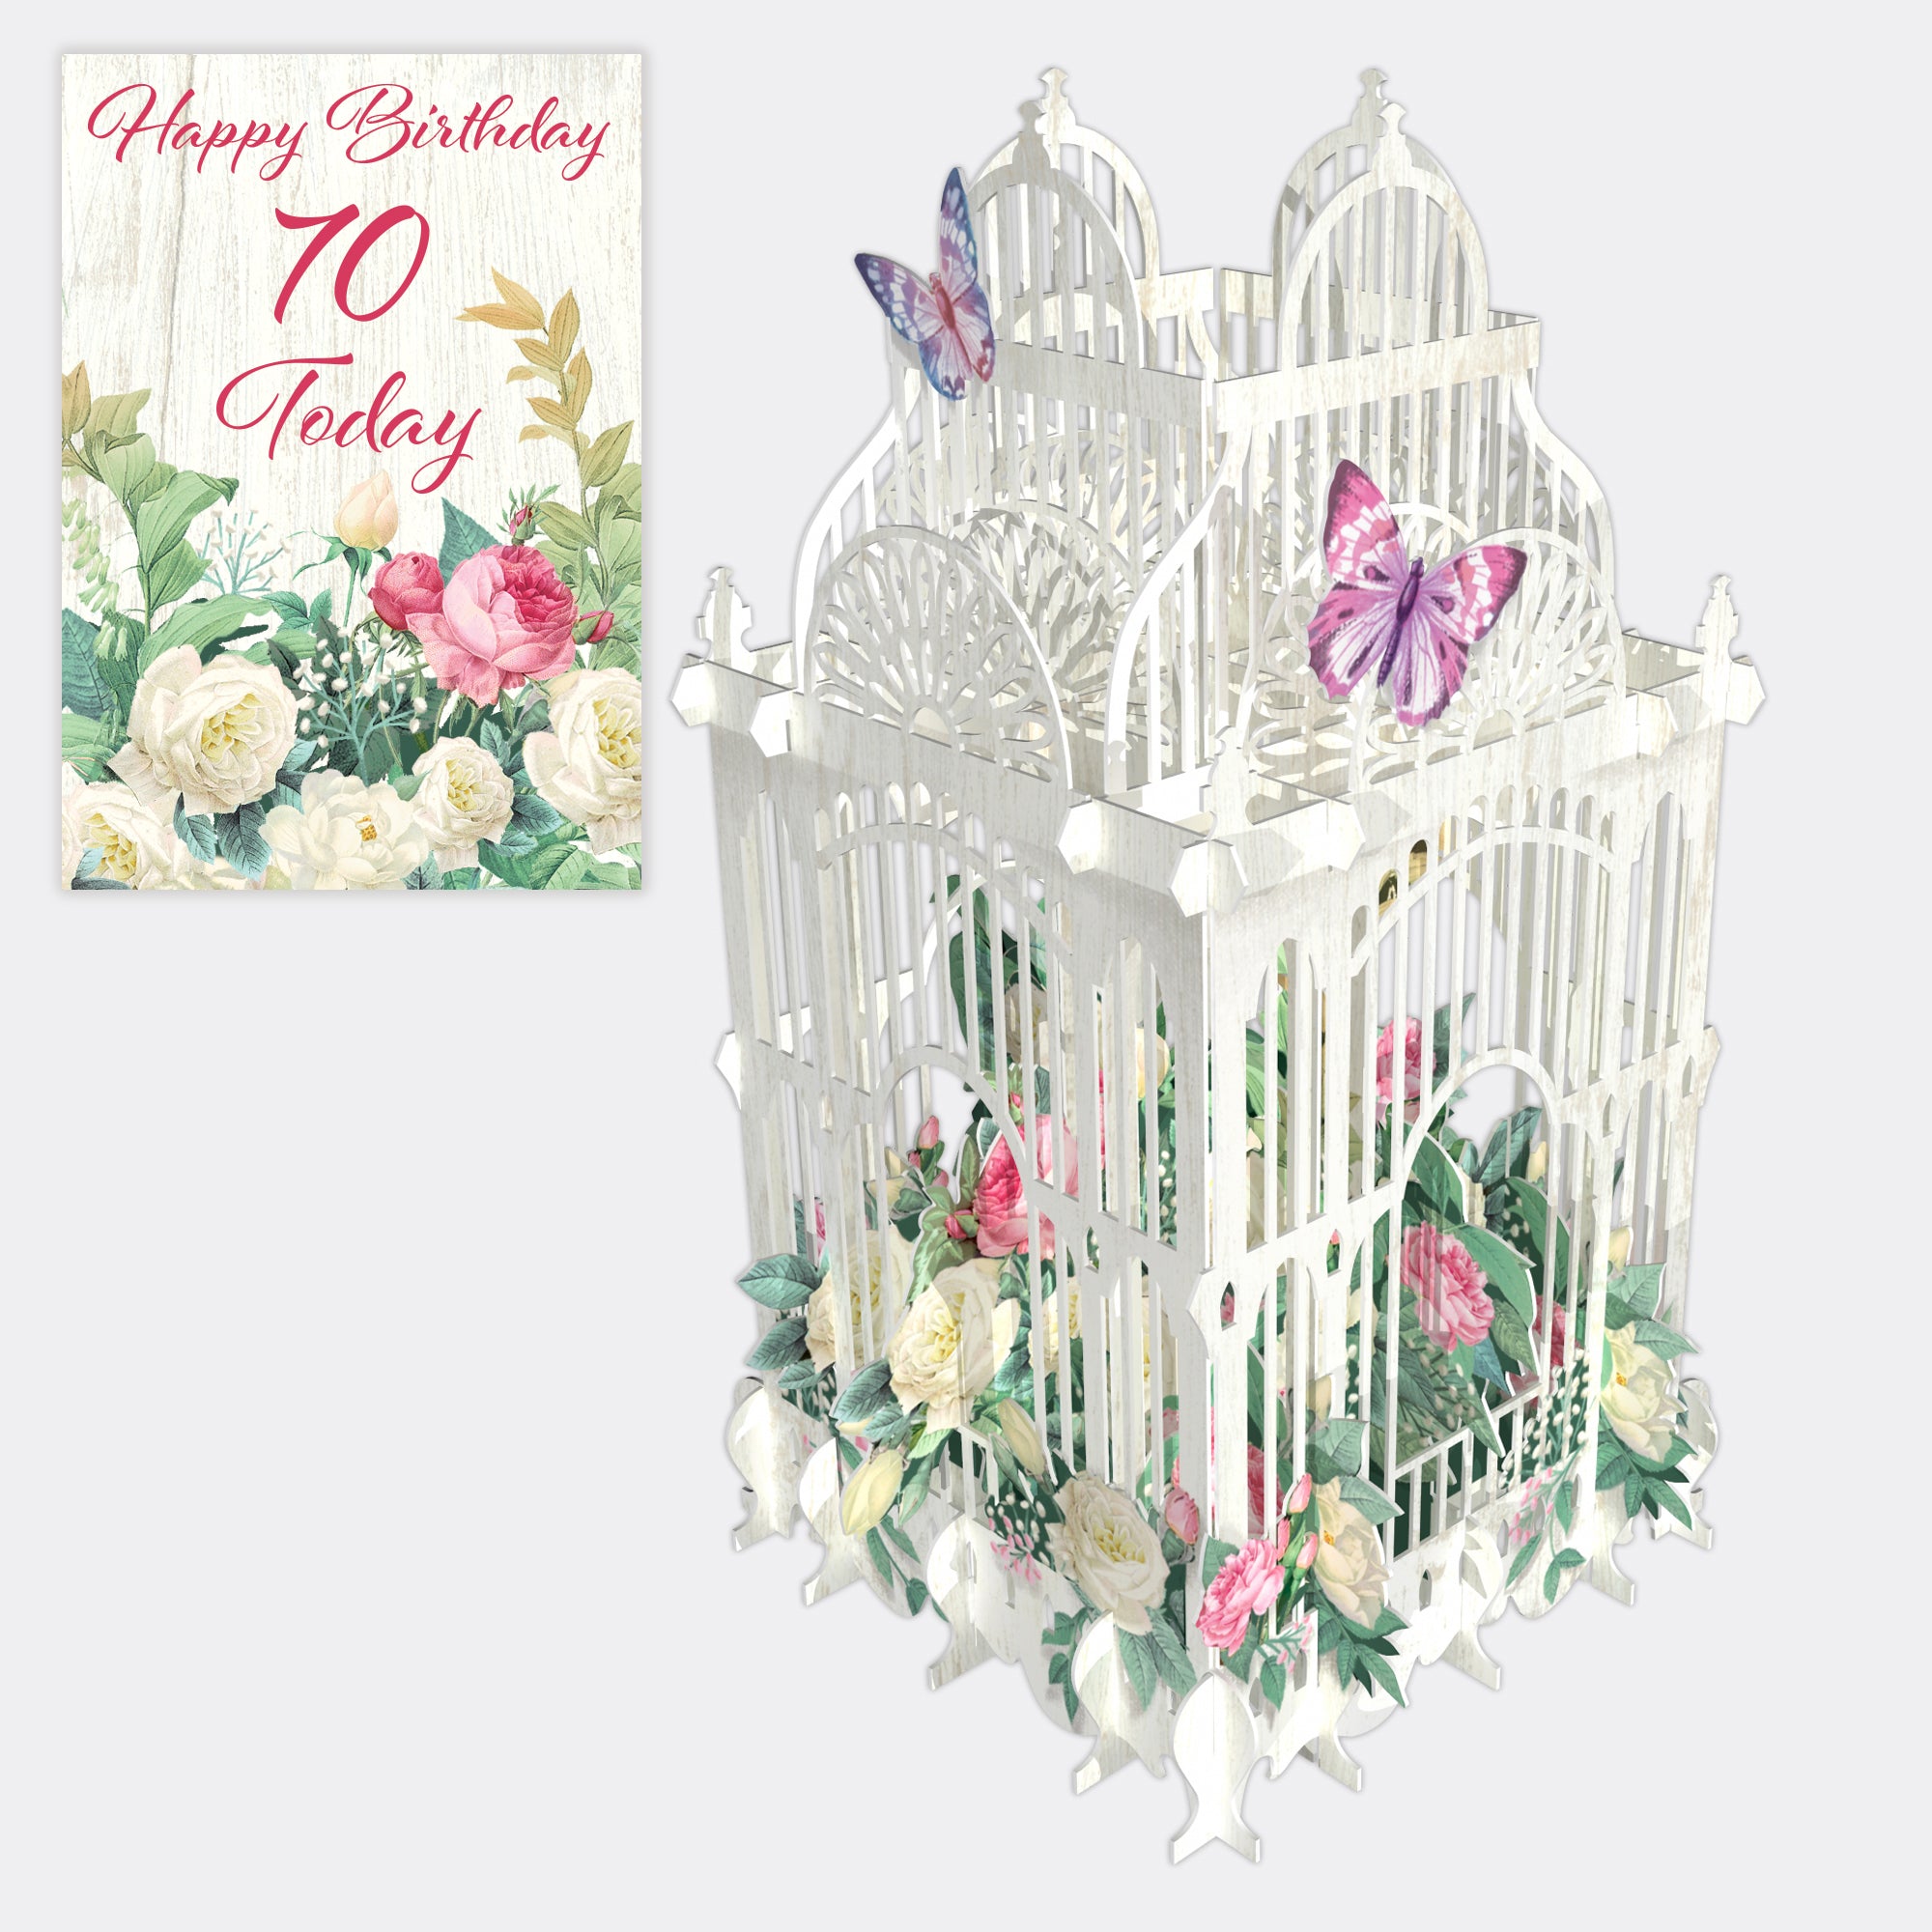 70 Today 3D Pop Up Birthday Card